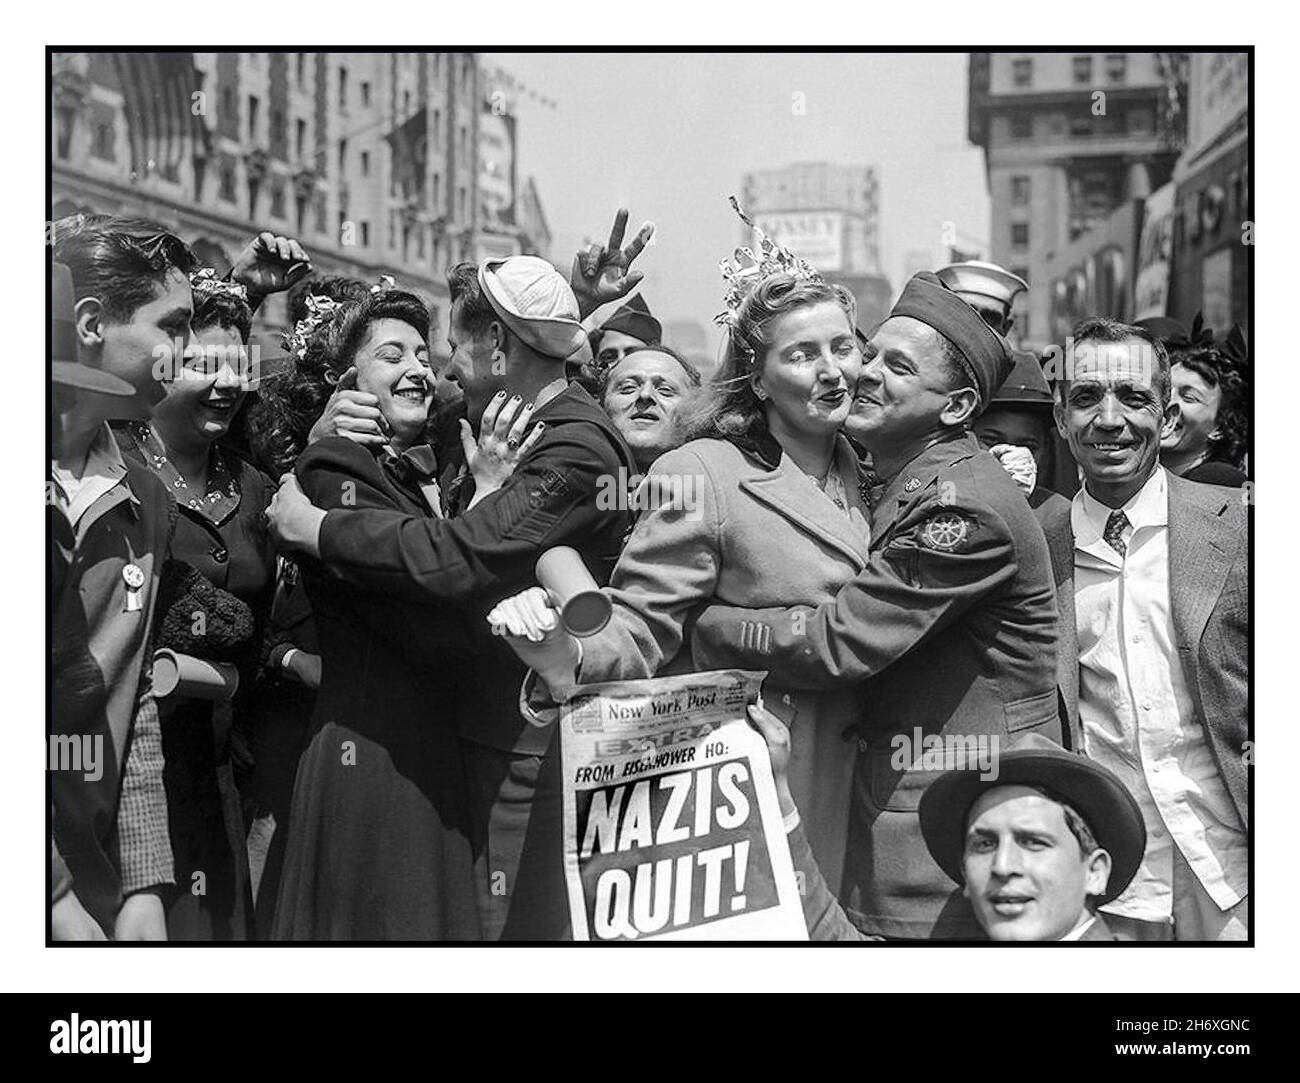 1945 VE Day, Victory in Europe Times Square New York WW2  VE Day celebrations USA newspaper headline 'NAZIS QUIT' World War II  Second World War Victory in Europe Day is the day celebrating the formal acceptance by the Allies of World War II of Germany's unconditional surrender of its armed forces on Tuesday, 8 May 1945, marking the end of World War II in Europe. Stock Photo